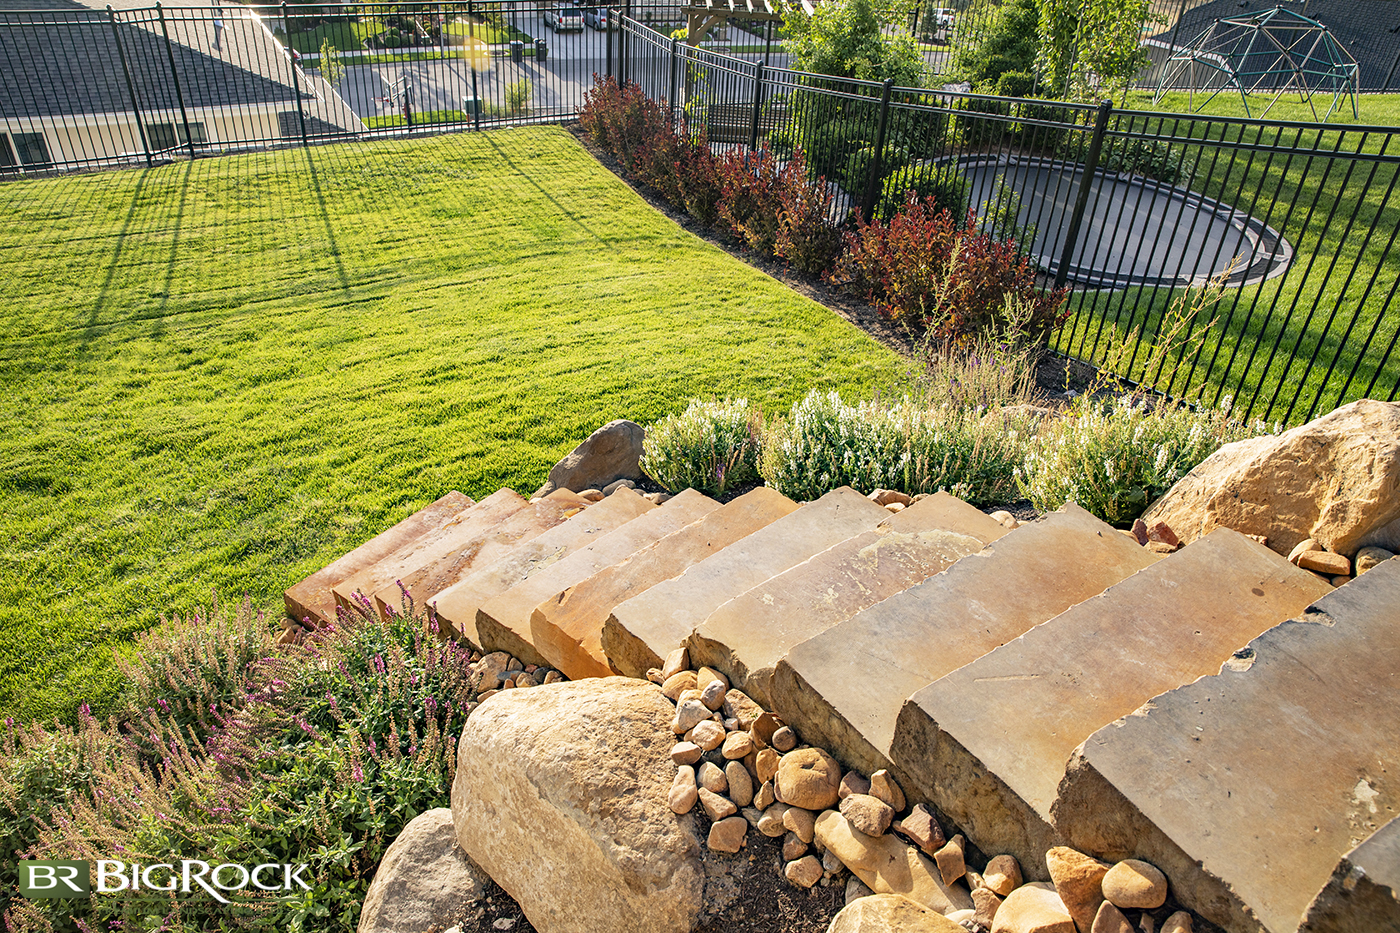 Create a custom landscape with the texture of natural stone. Hardscape landscape with stone is a great way to add interest to your landscape design.